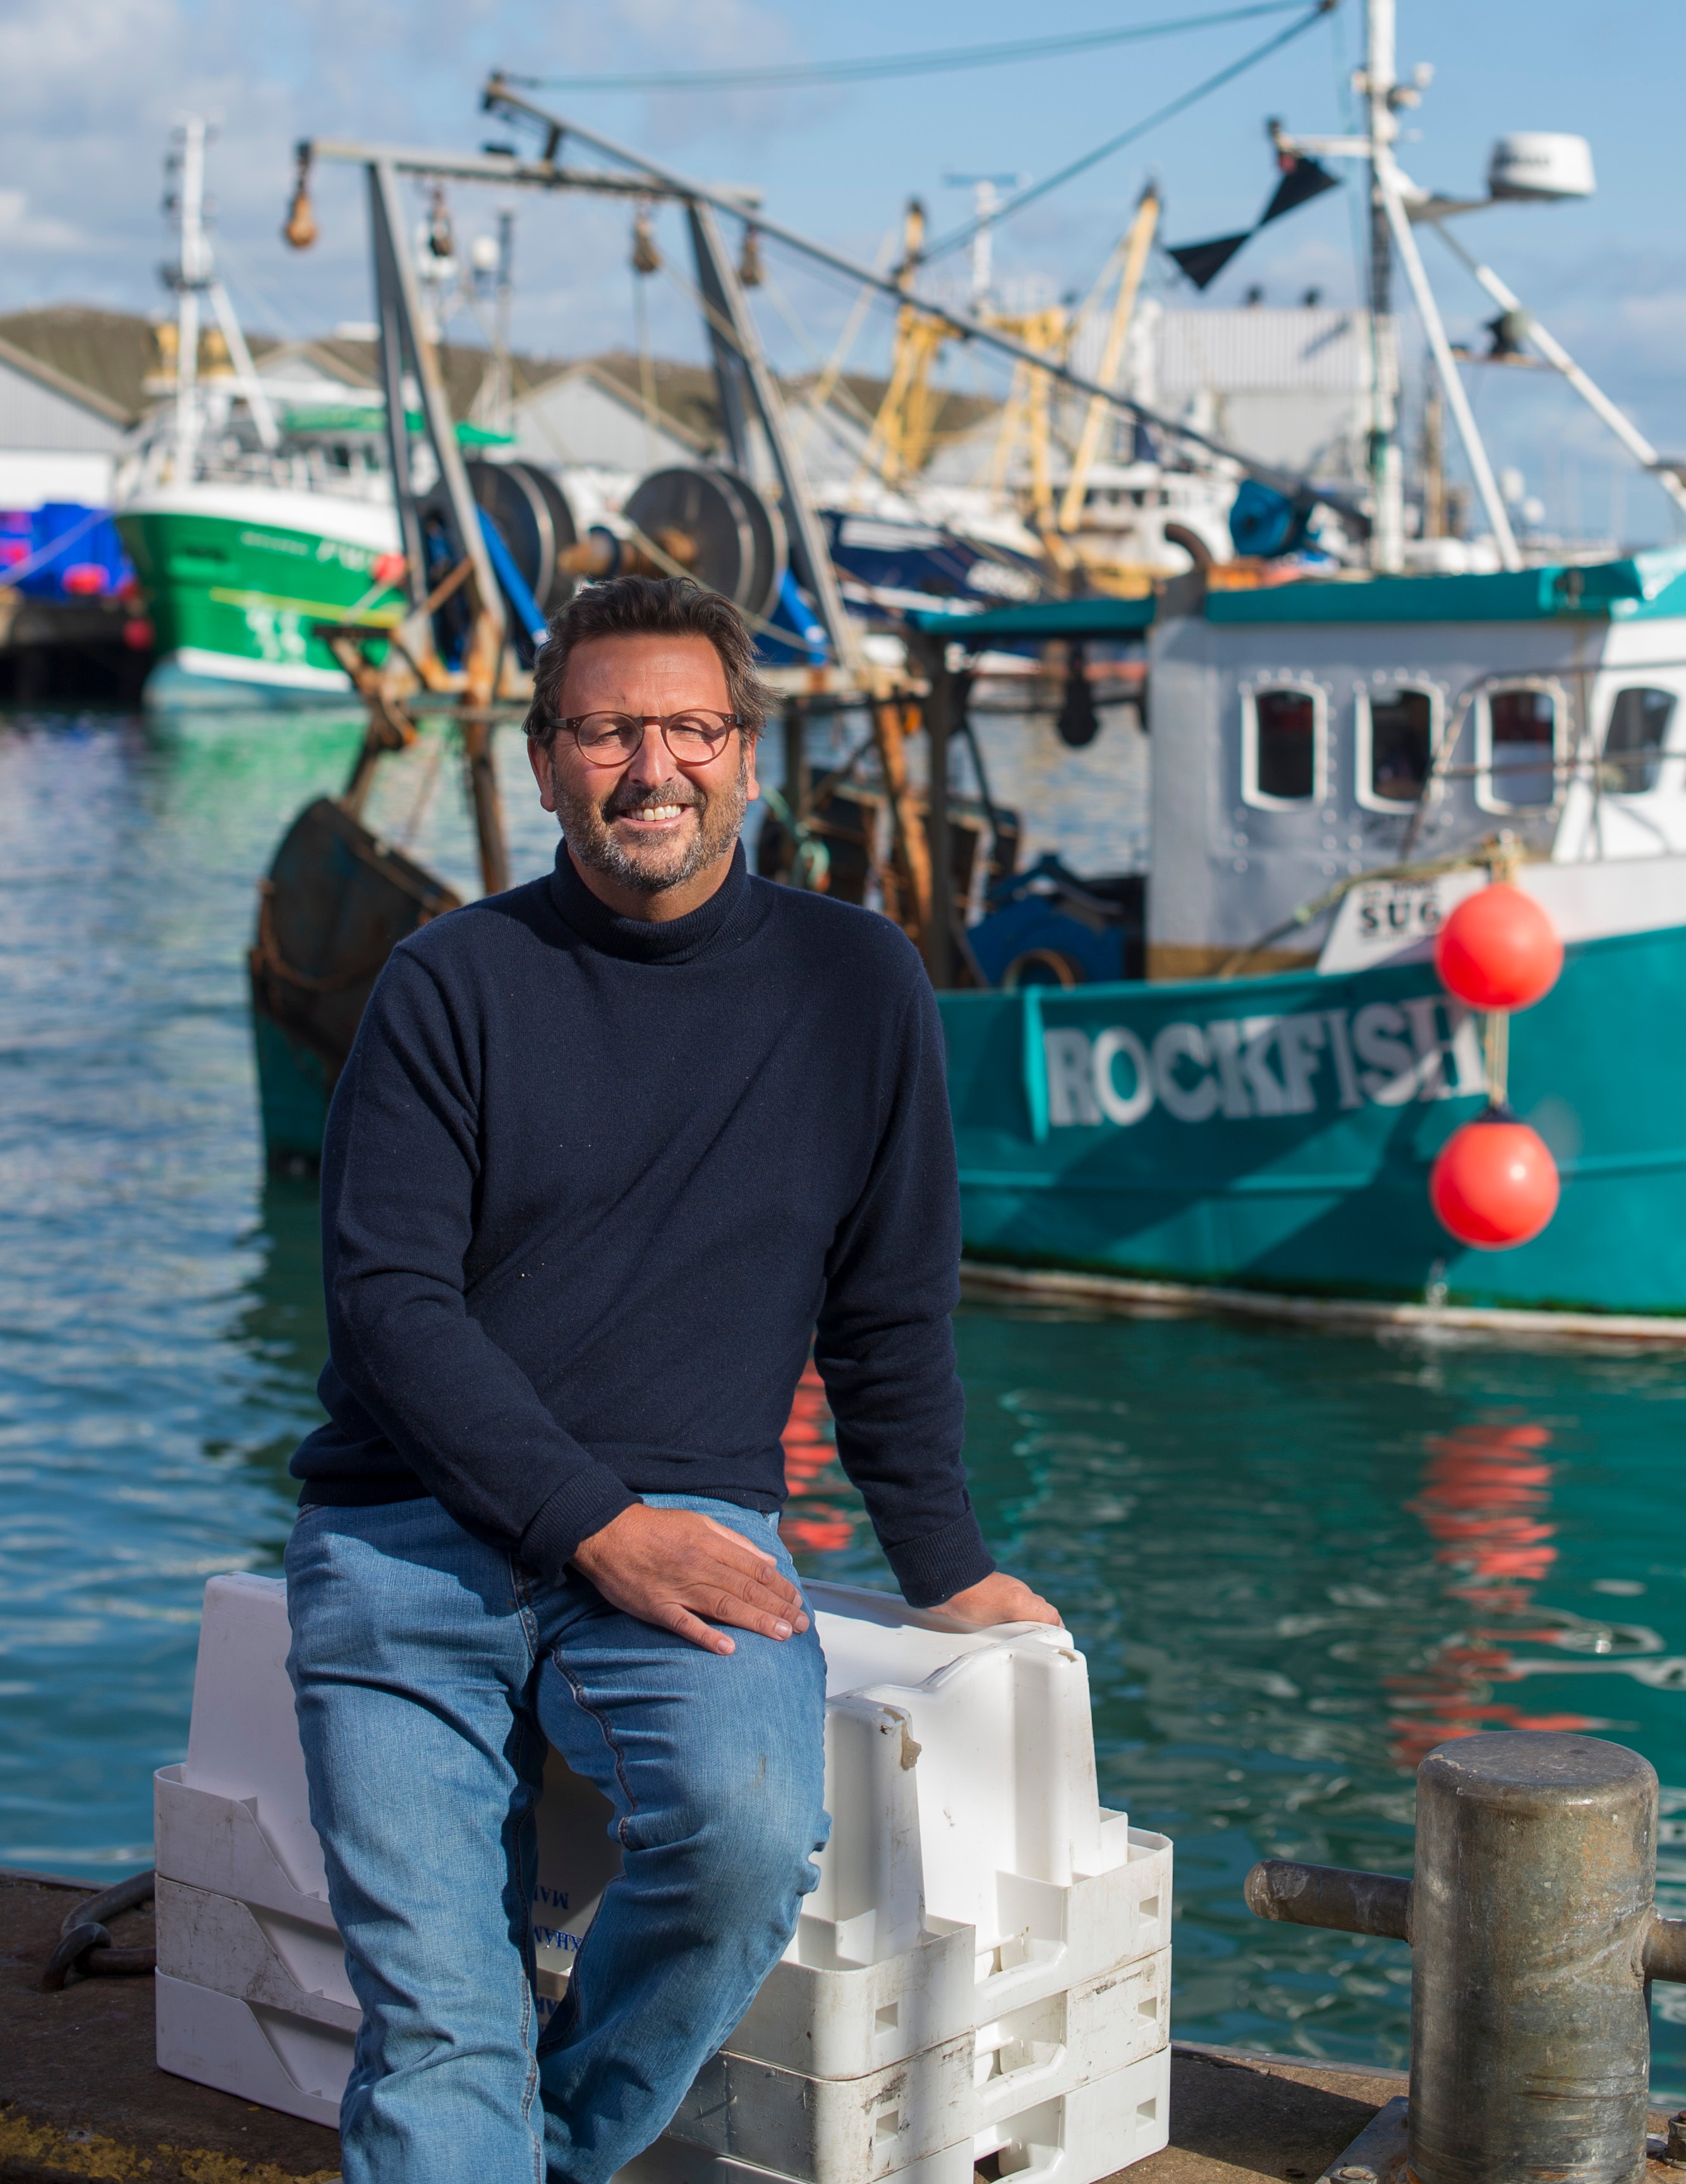 Mitch Tonks reveals how he made waves with his chain of Rockfish restaurants